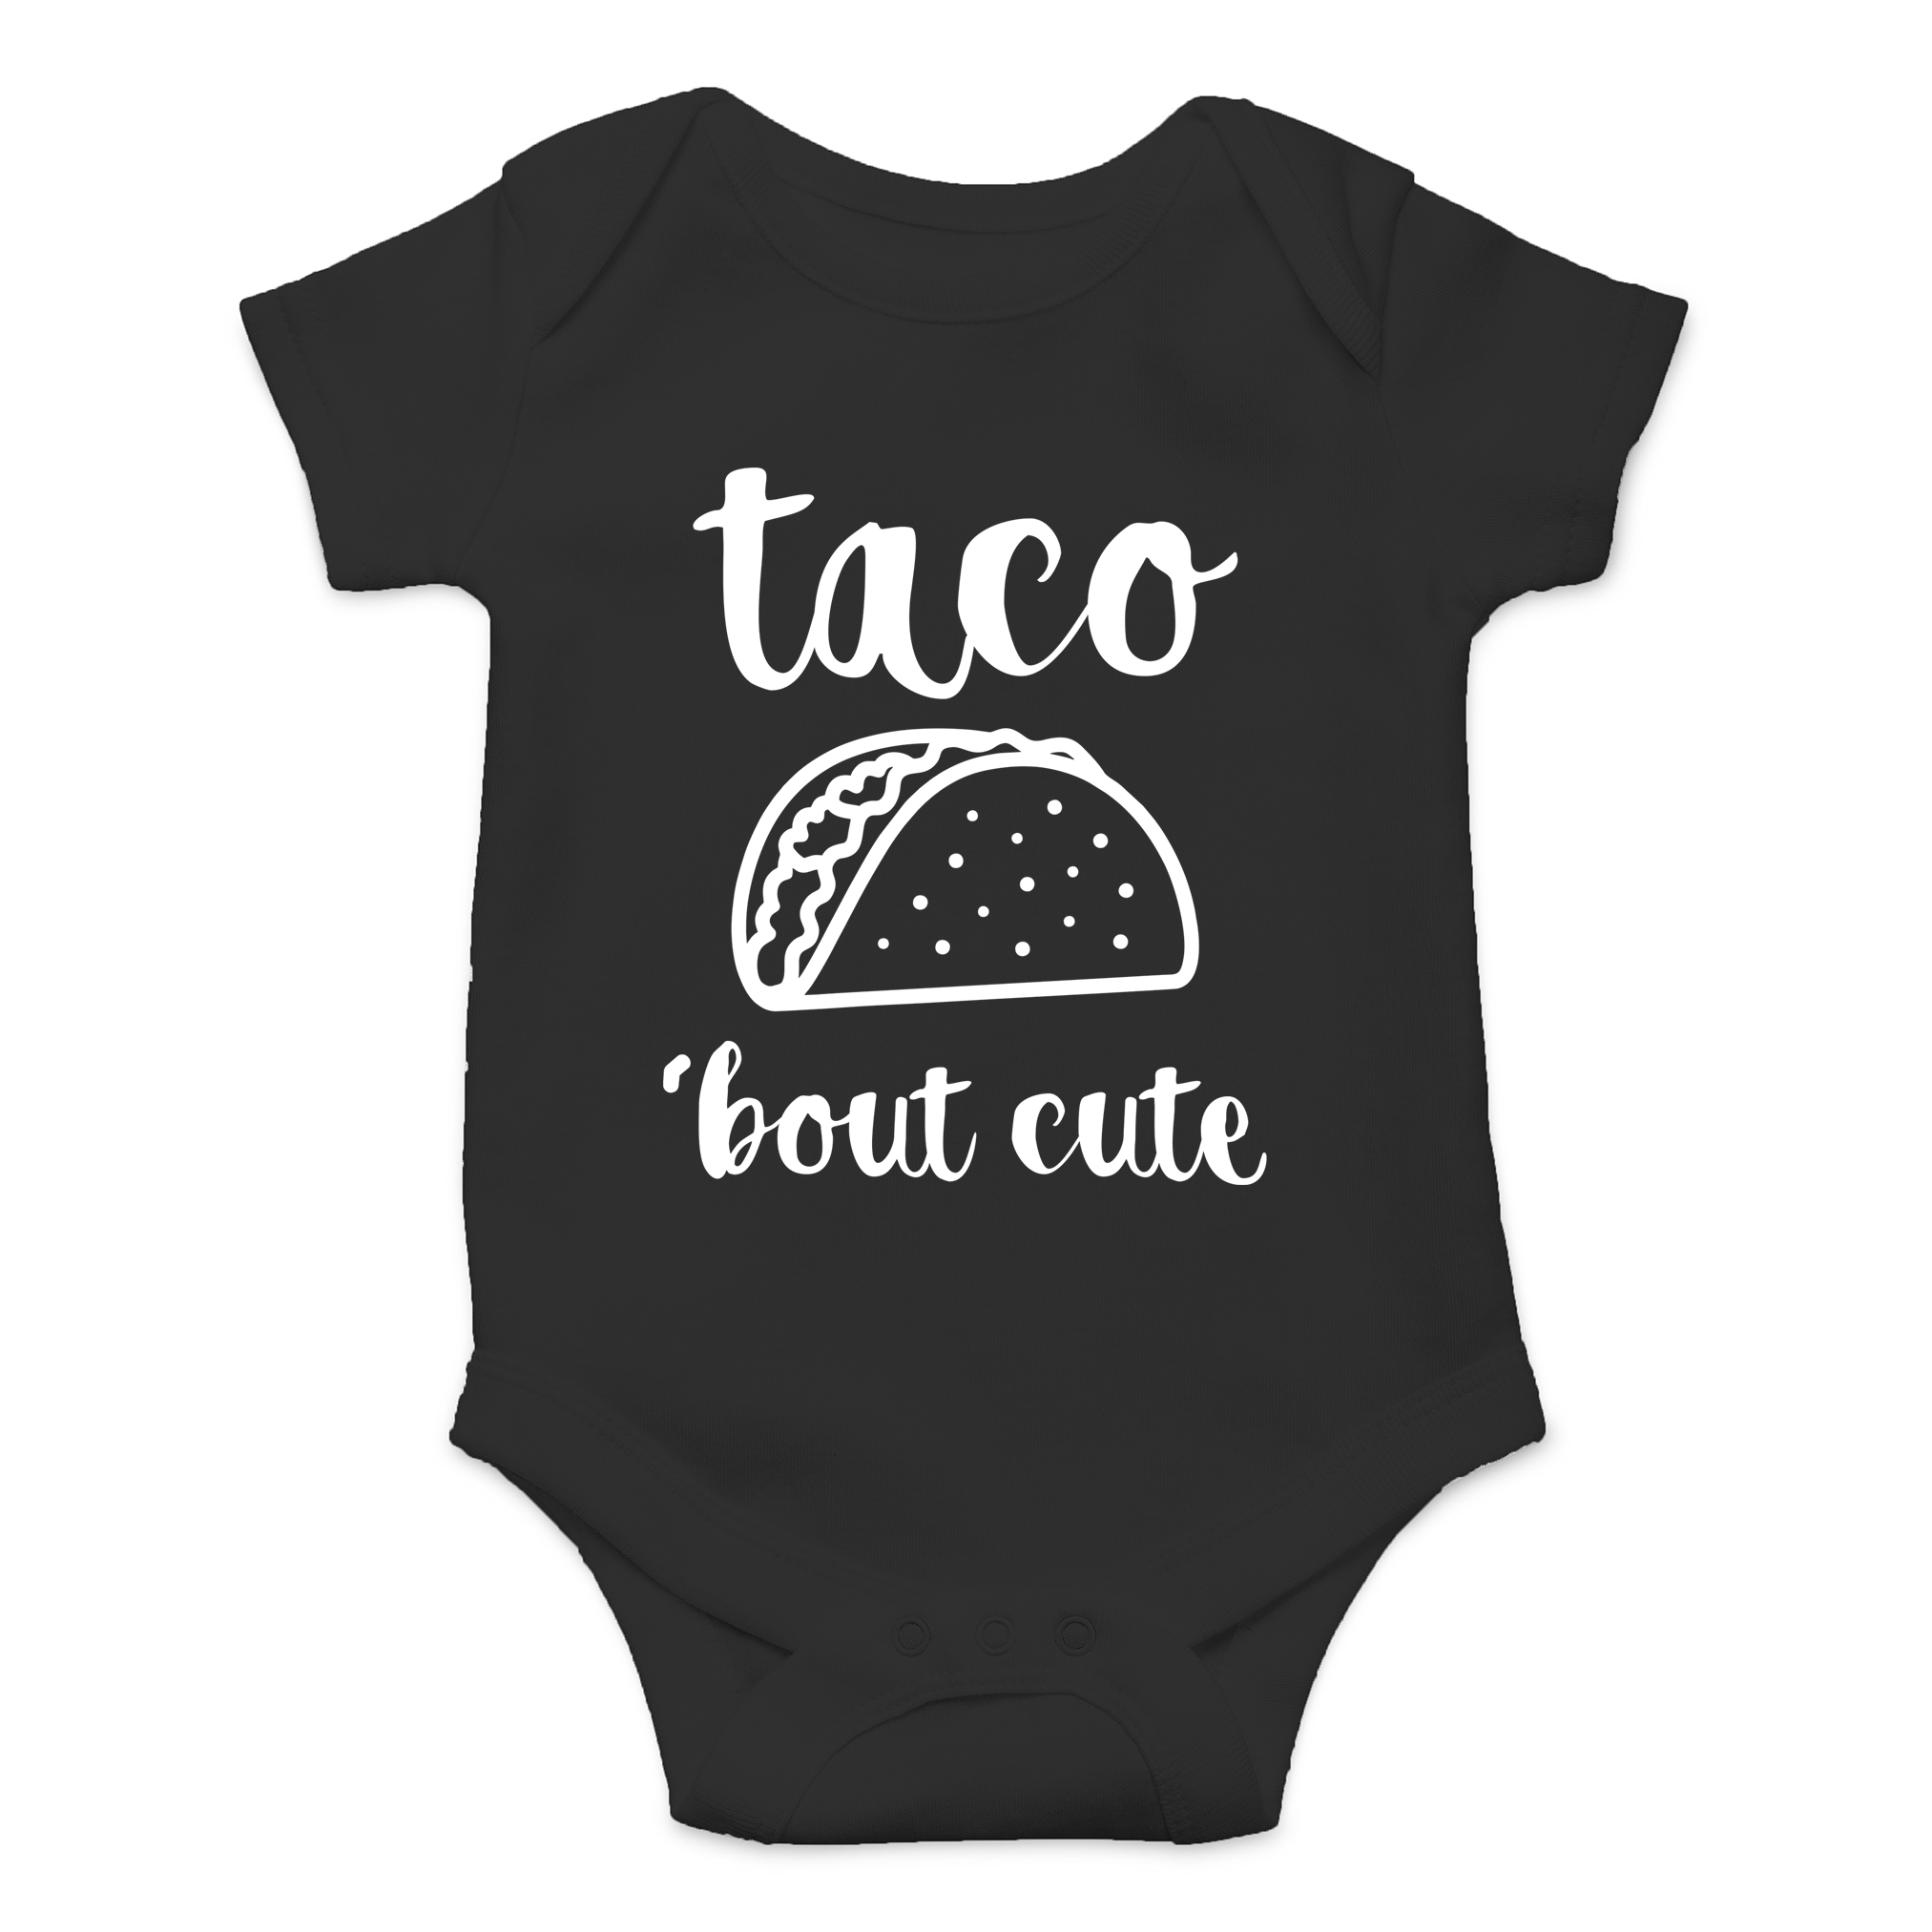 Taco 'Bout Cute - Funny Lil Adorable Tacos Mexican Food Lover - Cute One-Piece Infant Baby Bodysuit - image 1 of 4